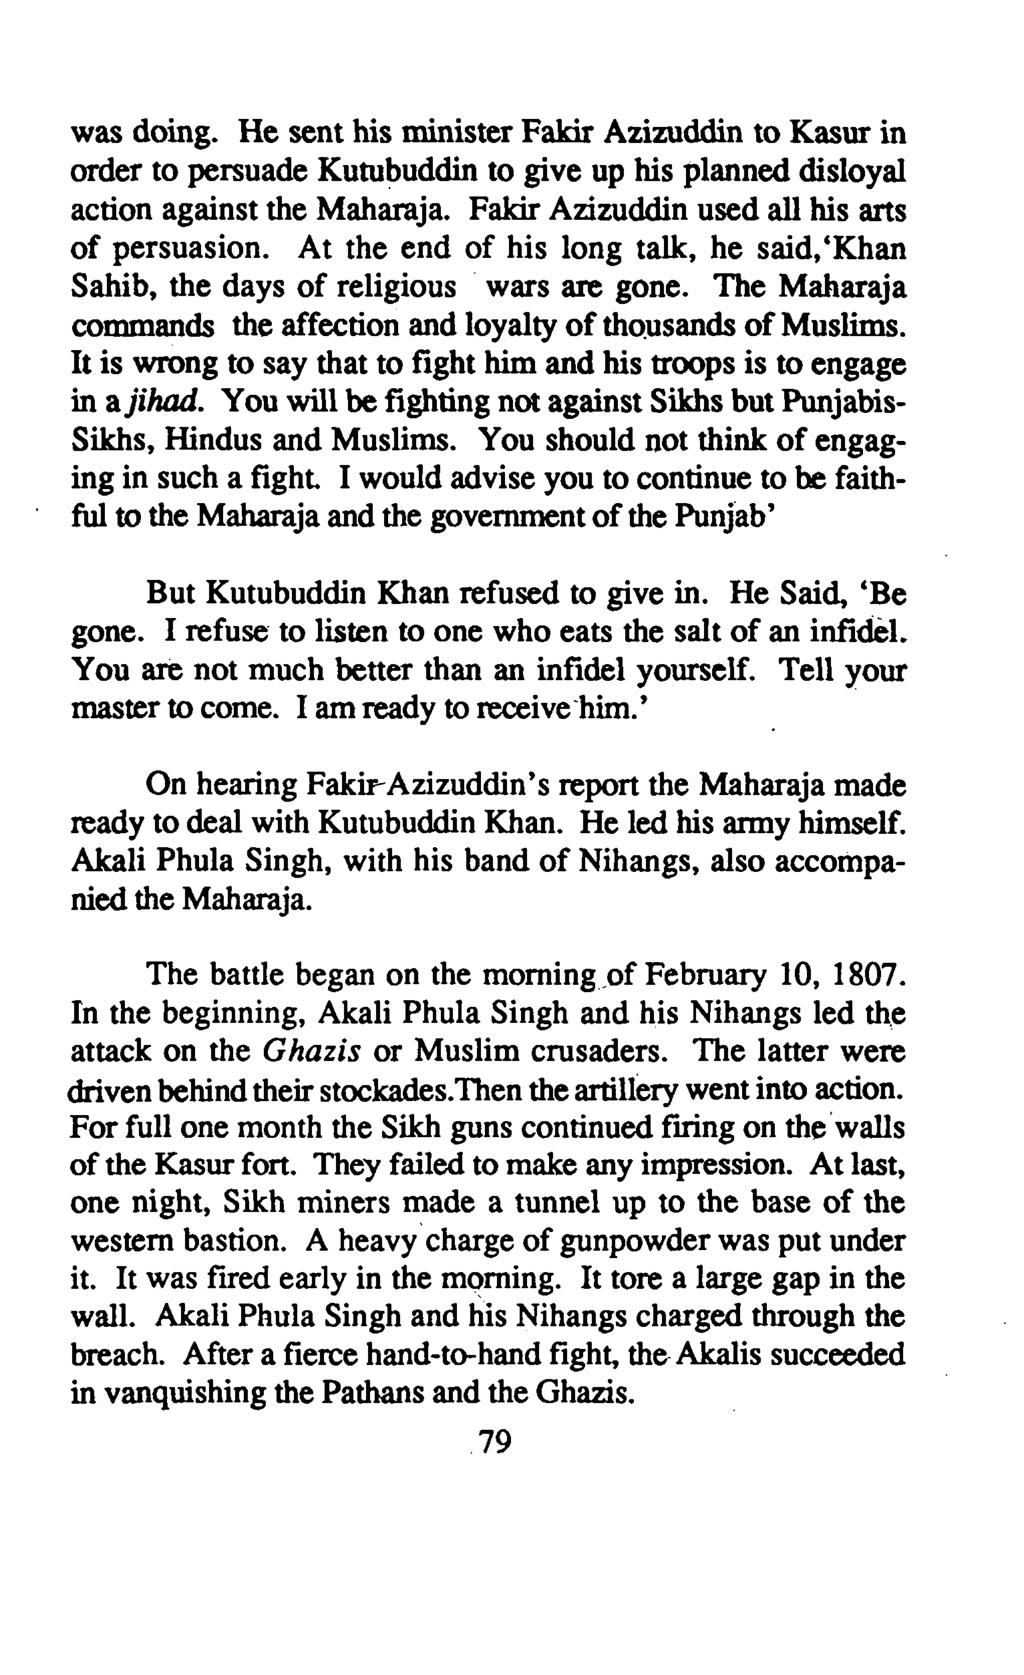 was doing. He sent his minister Fakir Azizuddin to Kasur in order to persuade Kutubuddin to give up his planned disloyal action against the Maharaja. Fakir Azizuddin used all his arts of persuasion.